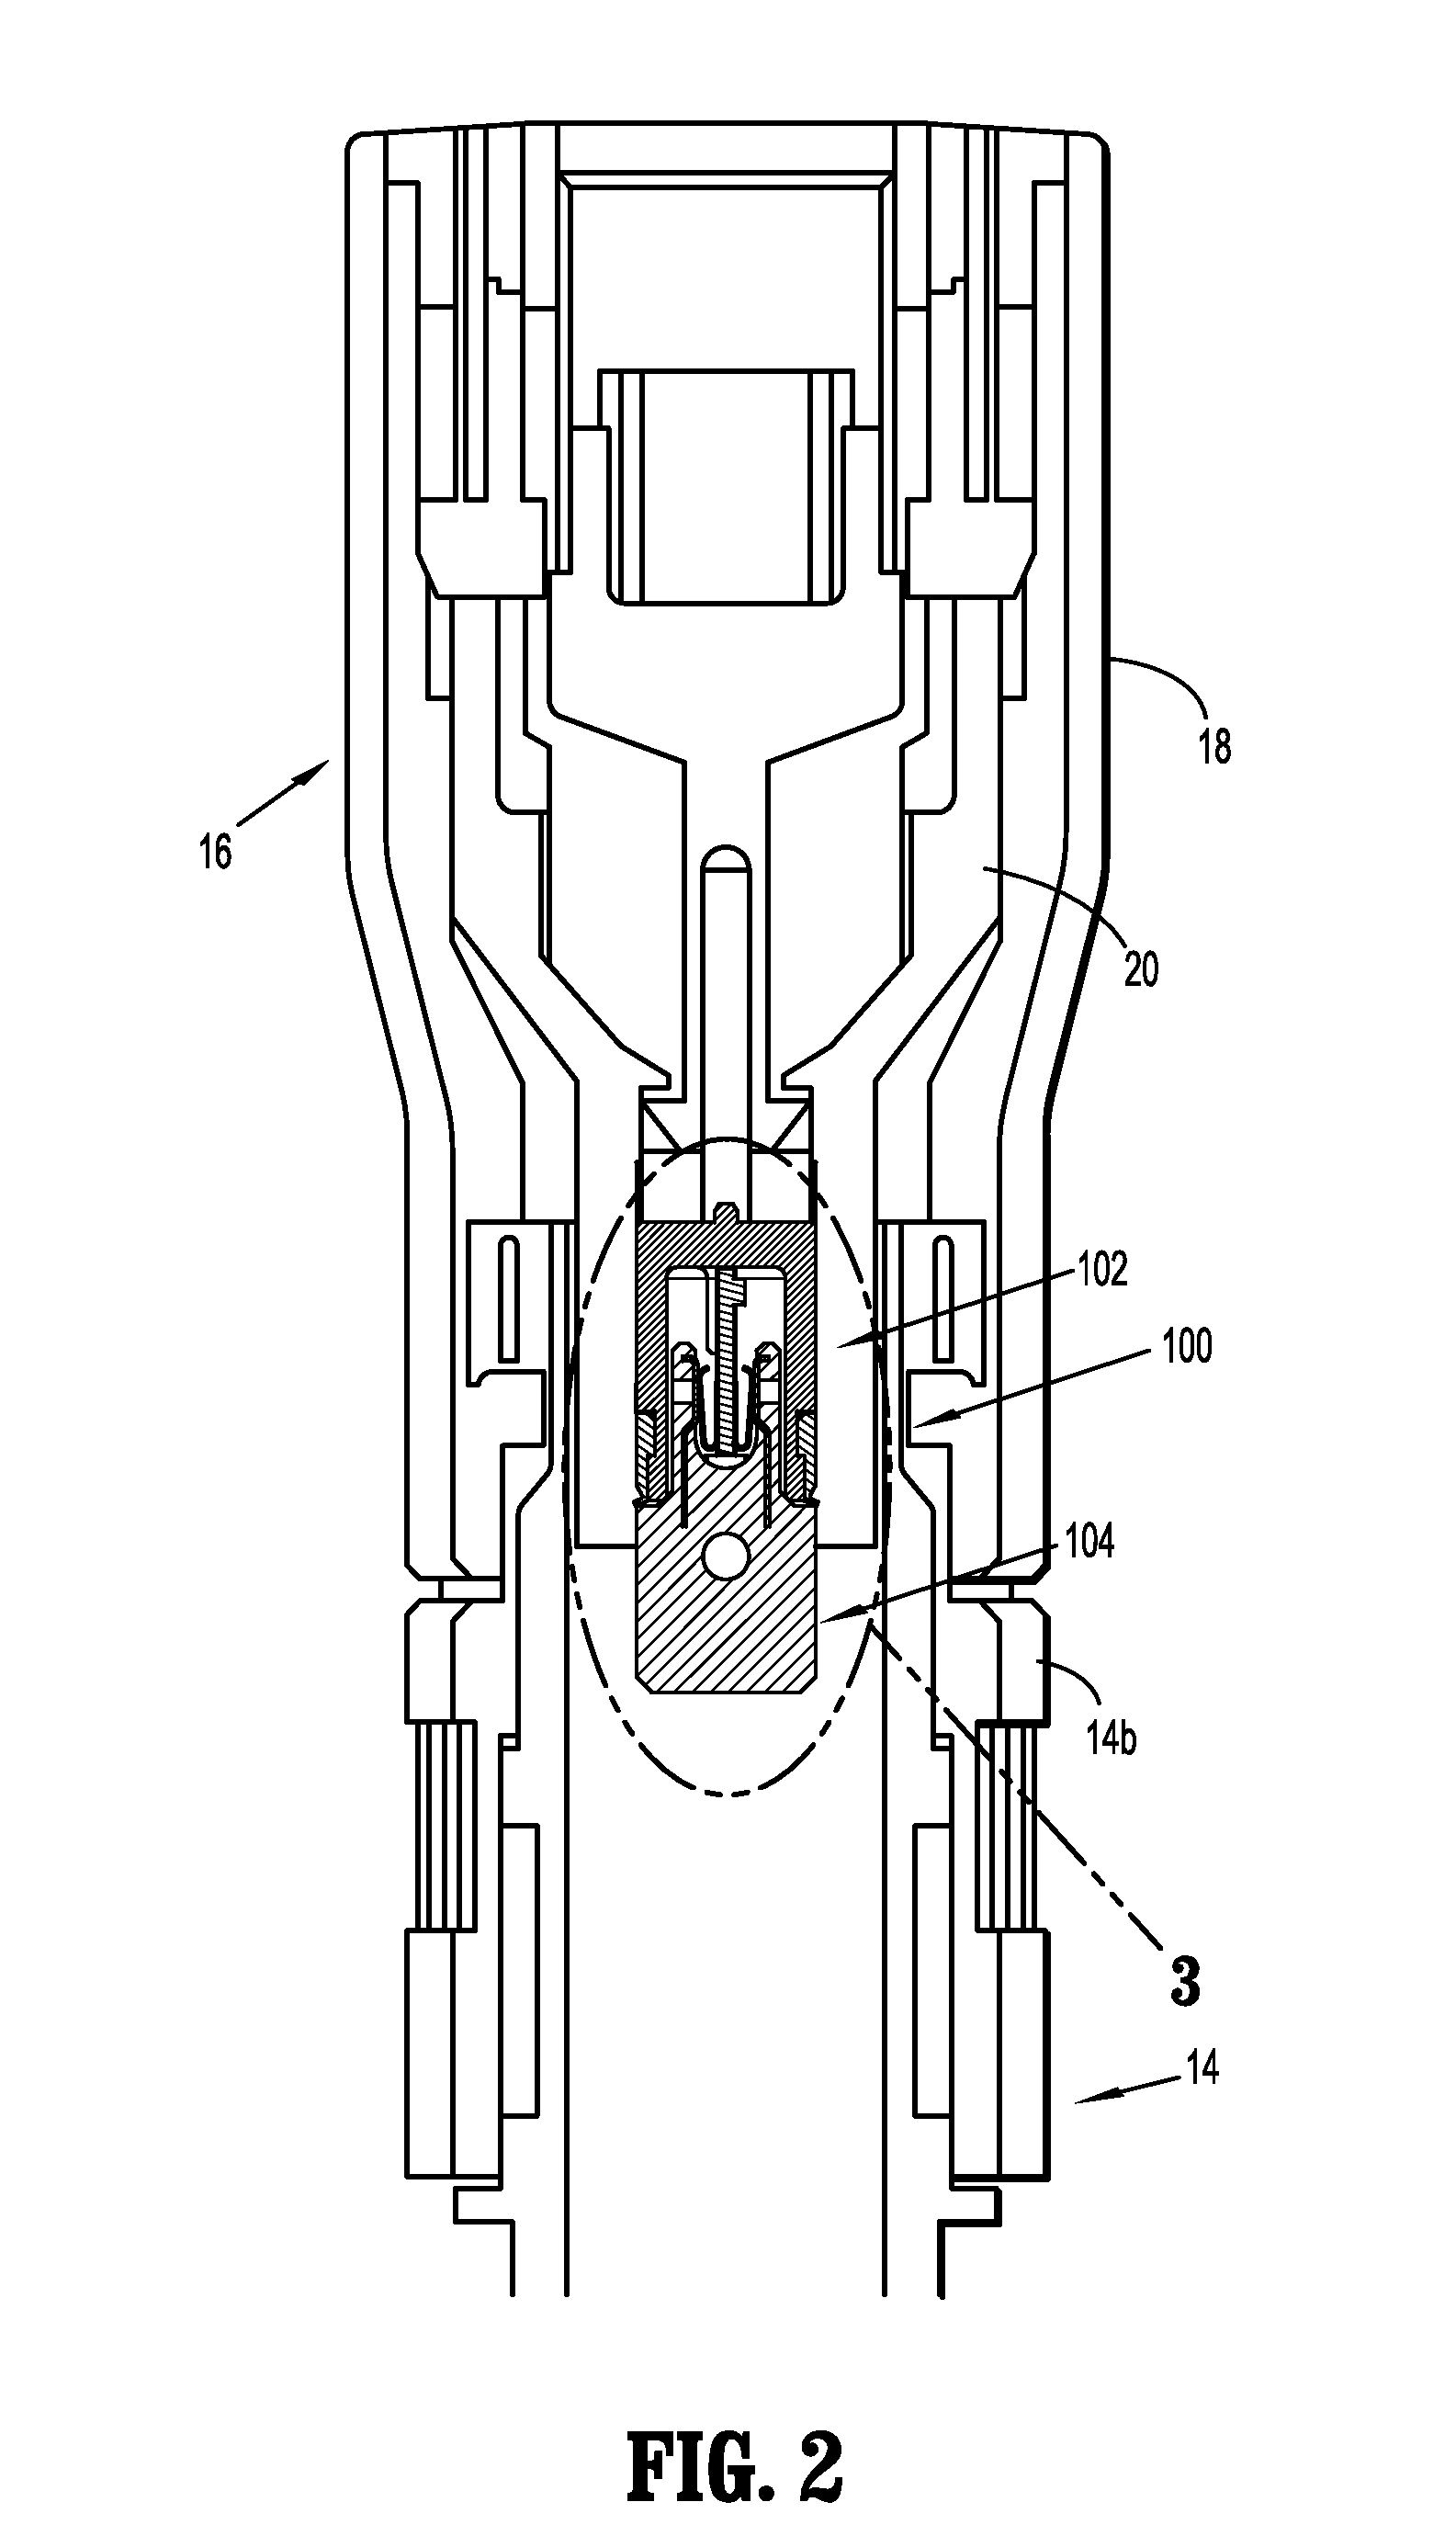 Chip assembly for reusable surgical instruments